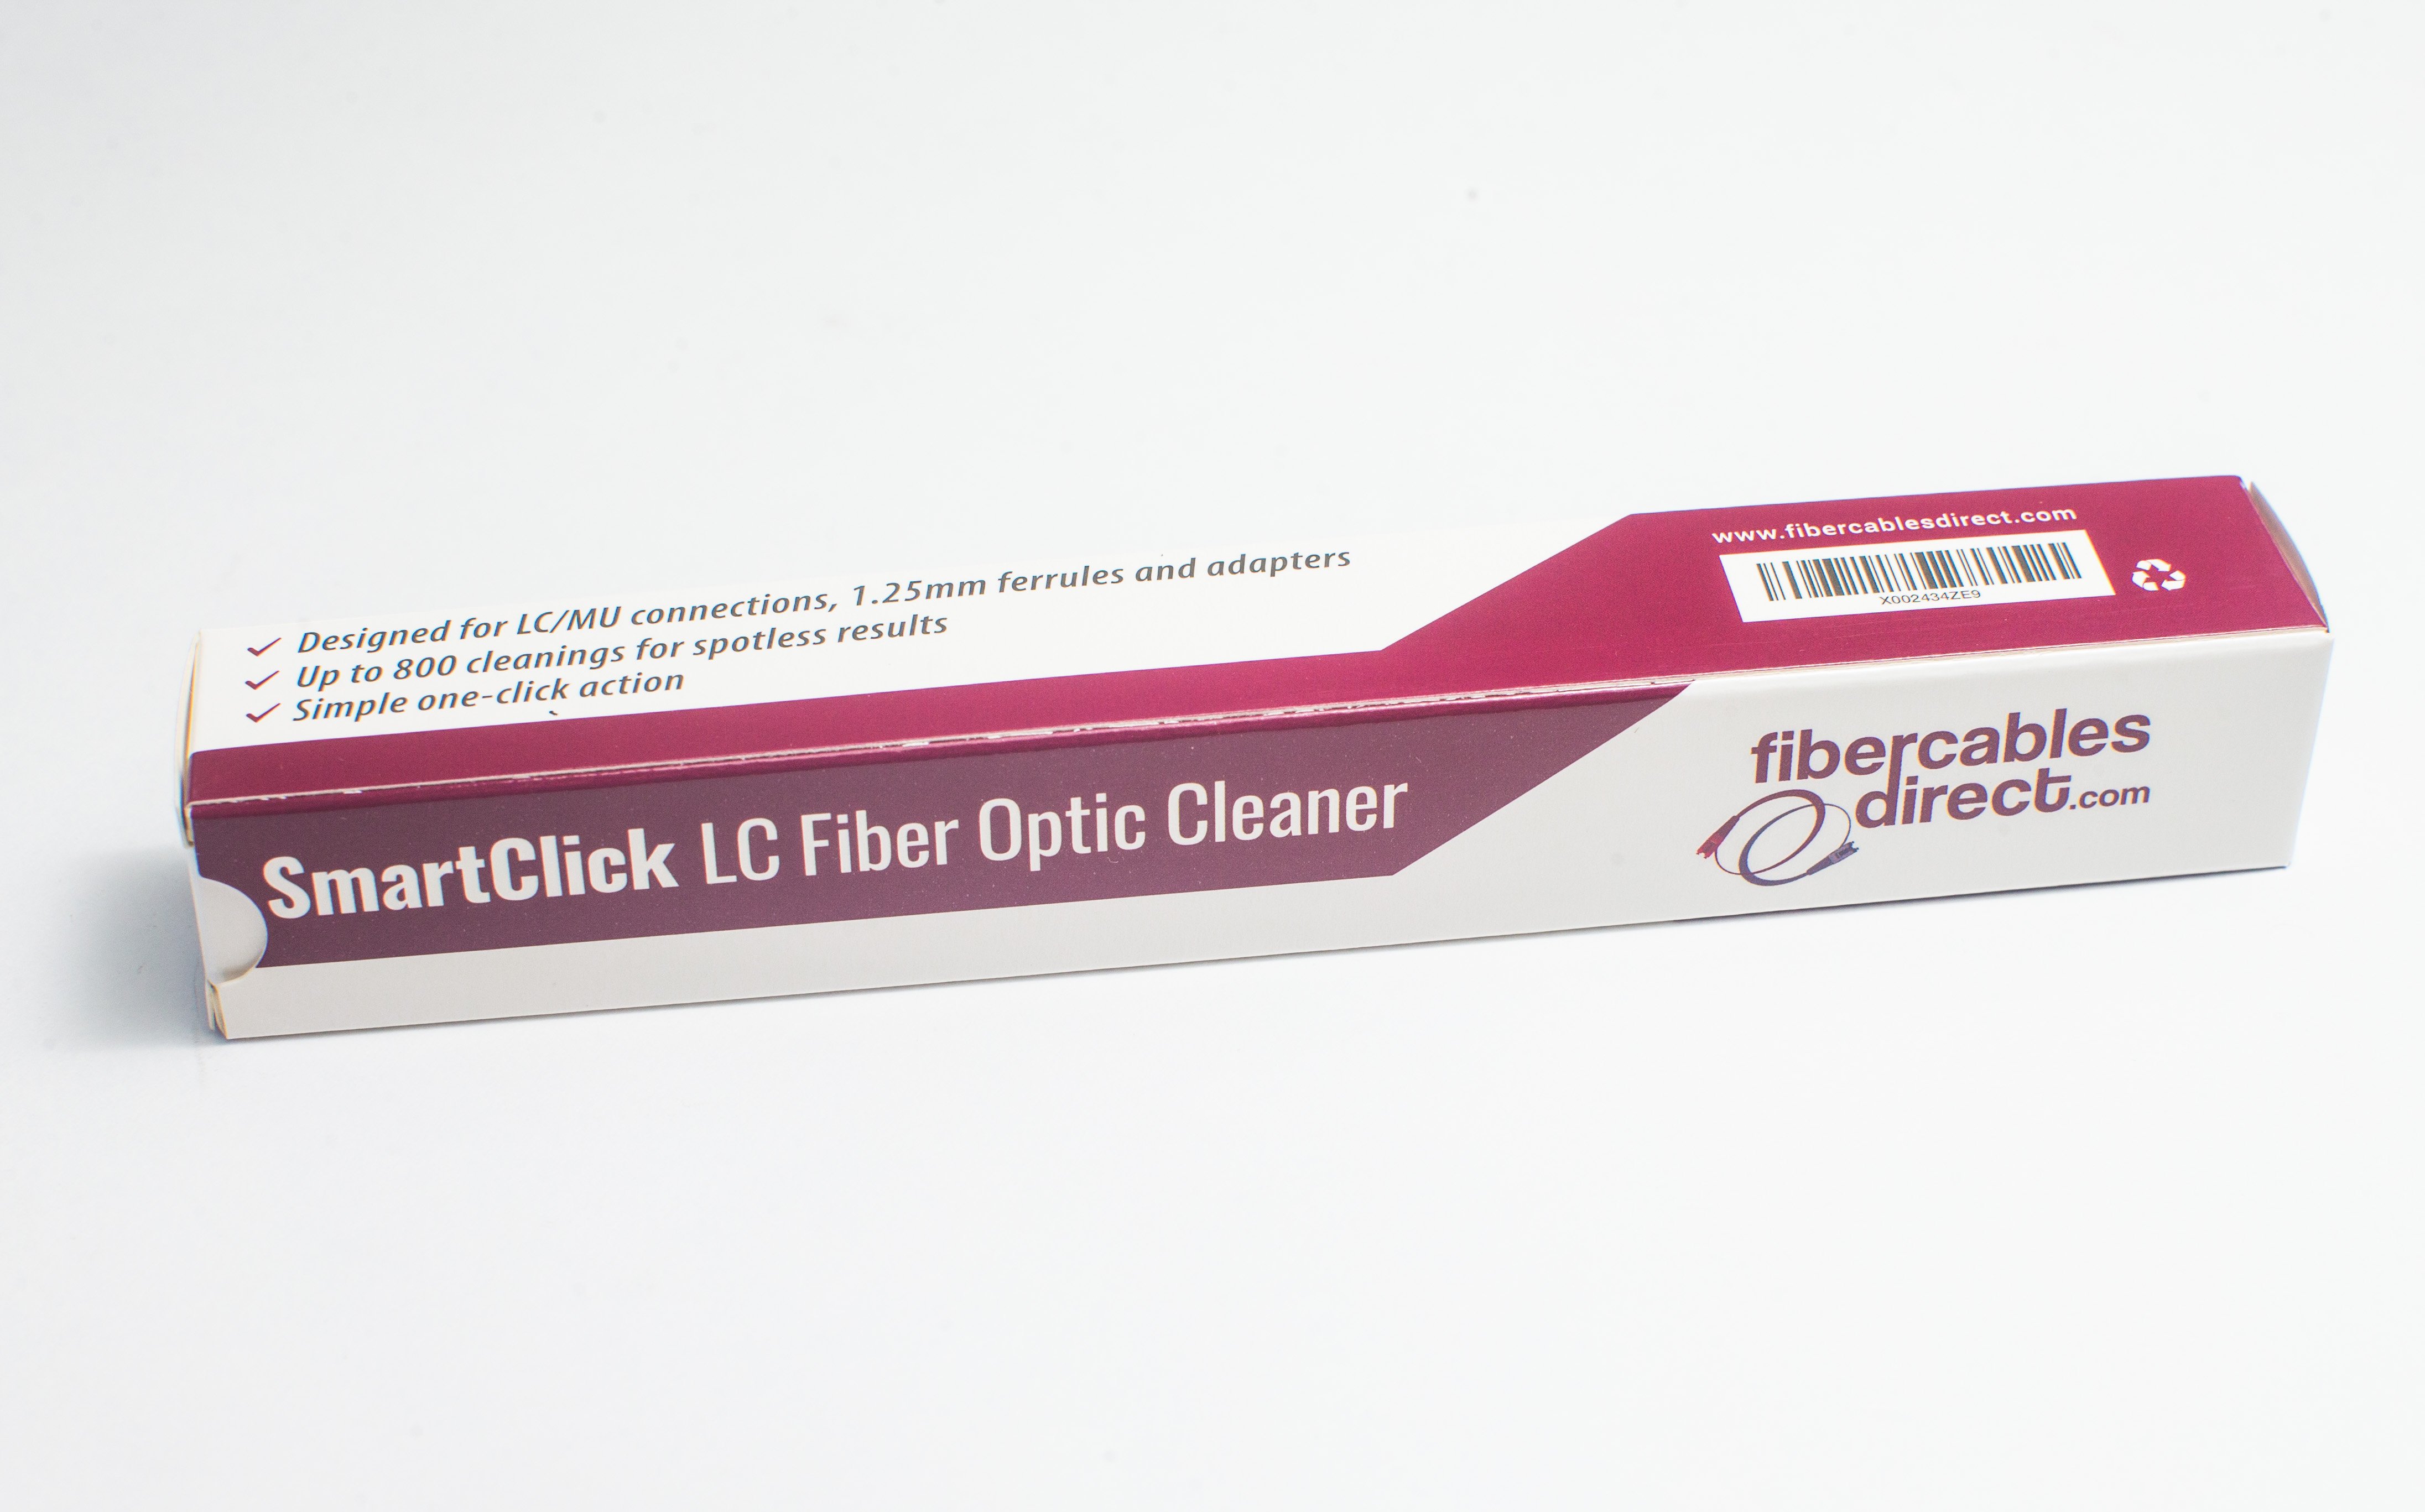 Fiber Optic Cleaner Cleans LC/MU 1.25mm adapters and Ferrules Over 800 cleans